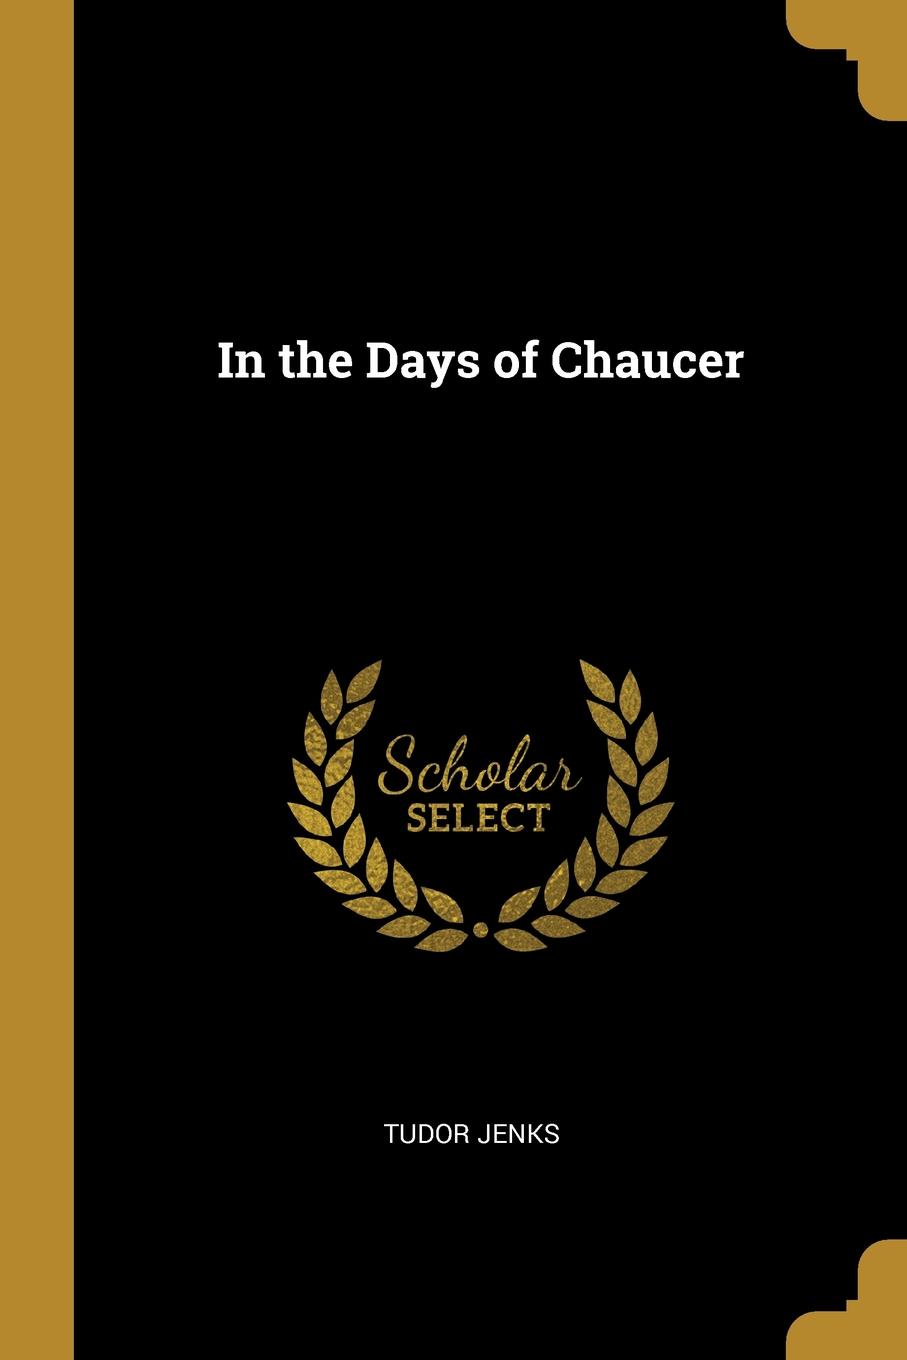 In the Days of Chaucer